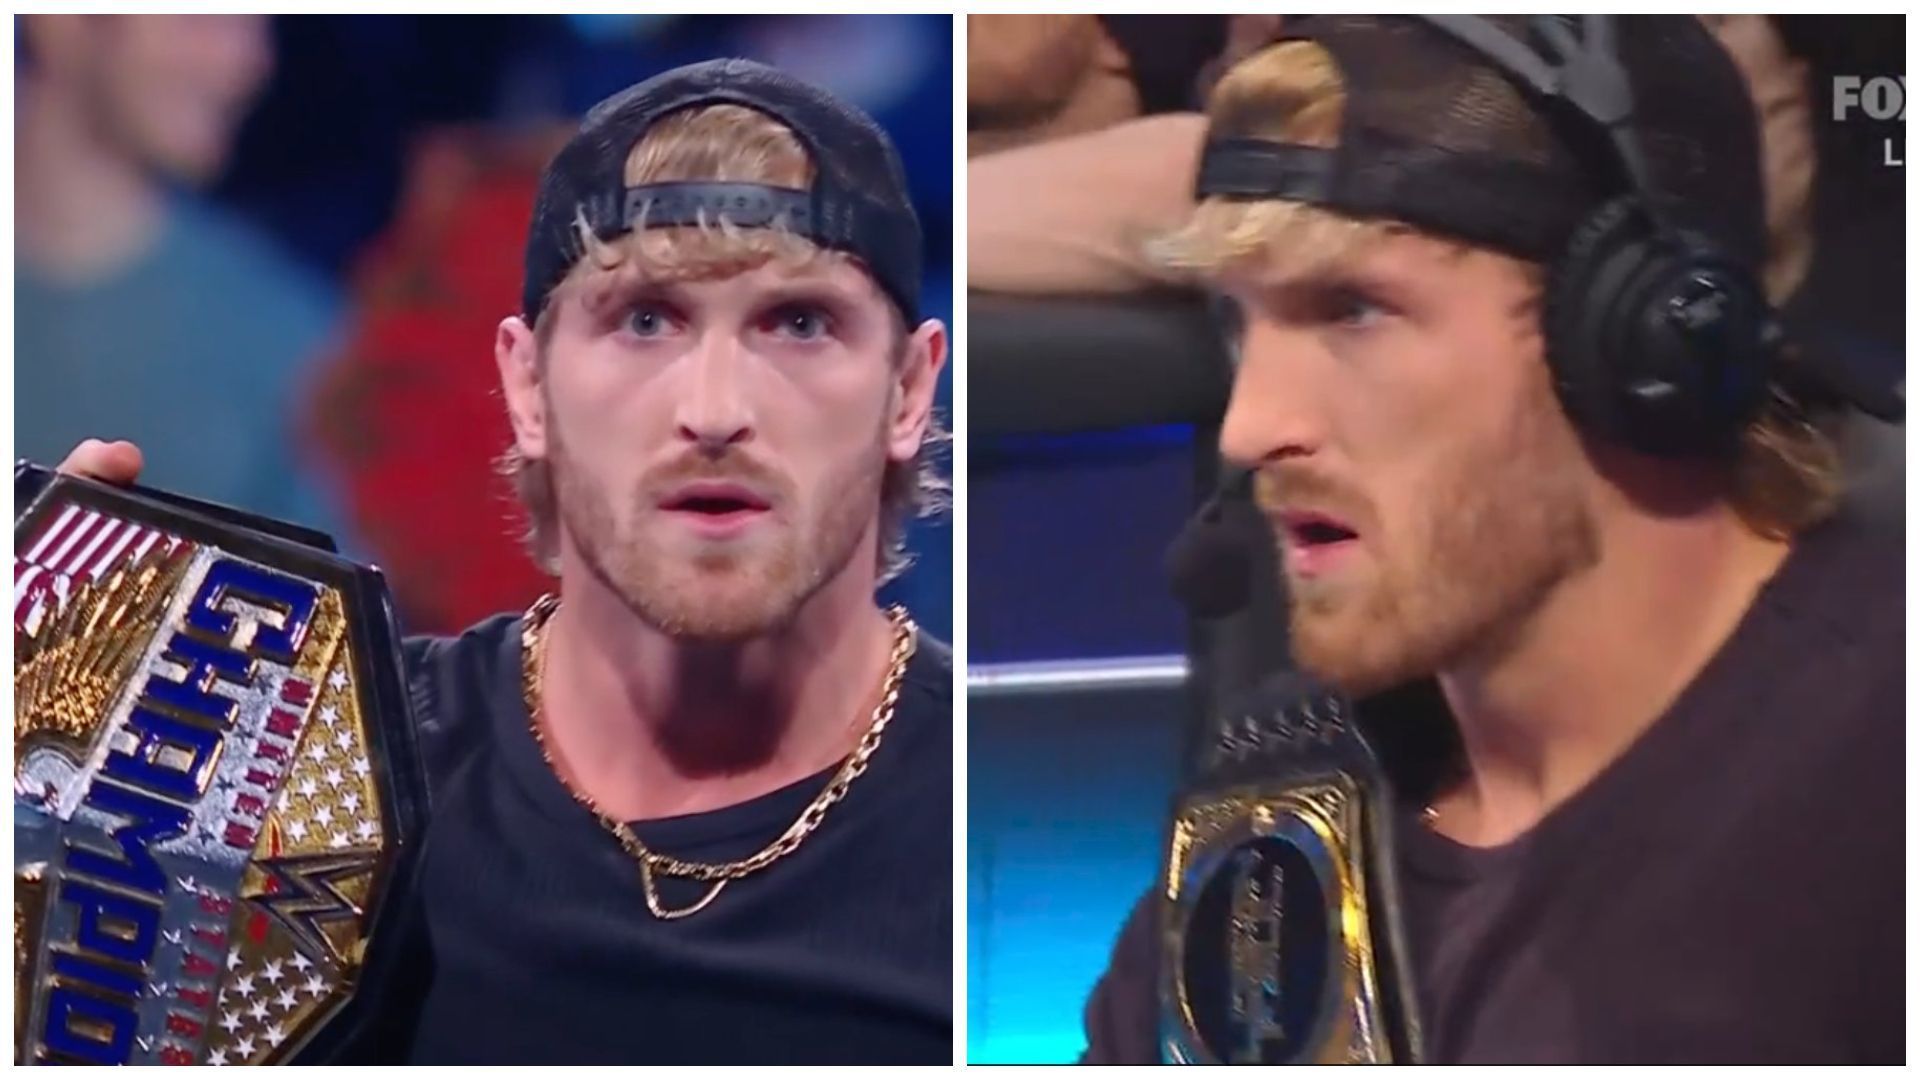 Logan Paul is the current WWE United States Champion.